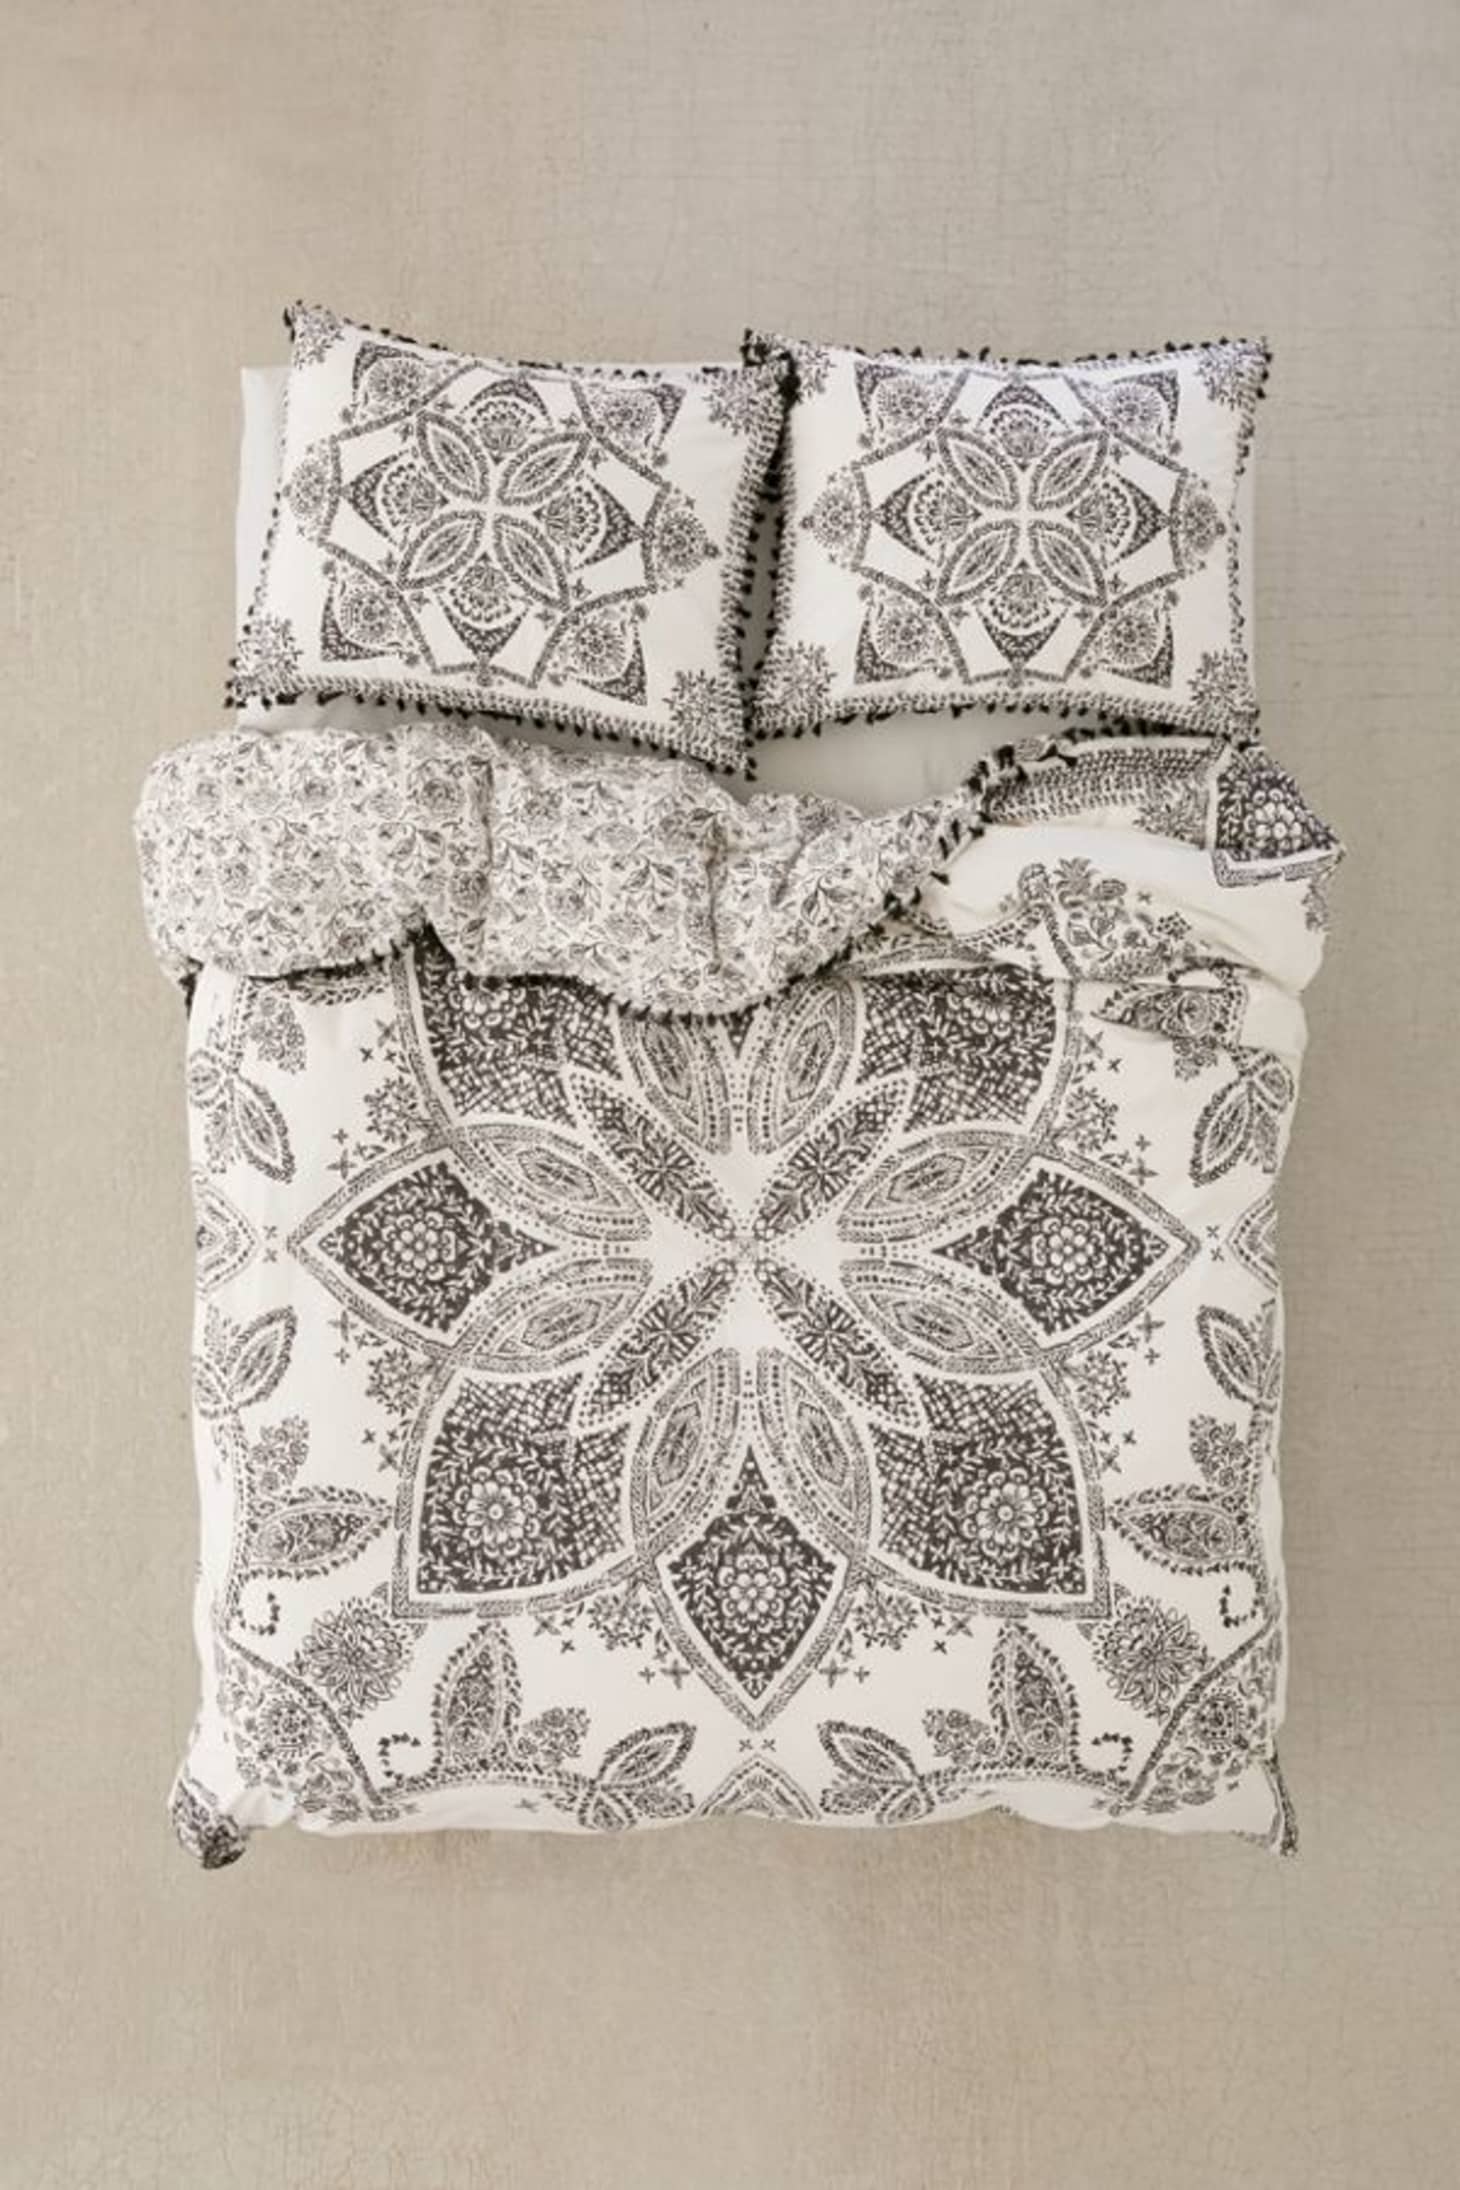 Urban Outfitters Bedding Sale Home Deals August 2019 Apartment